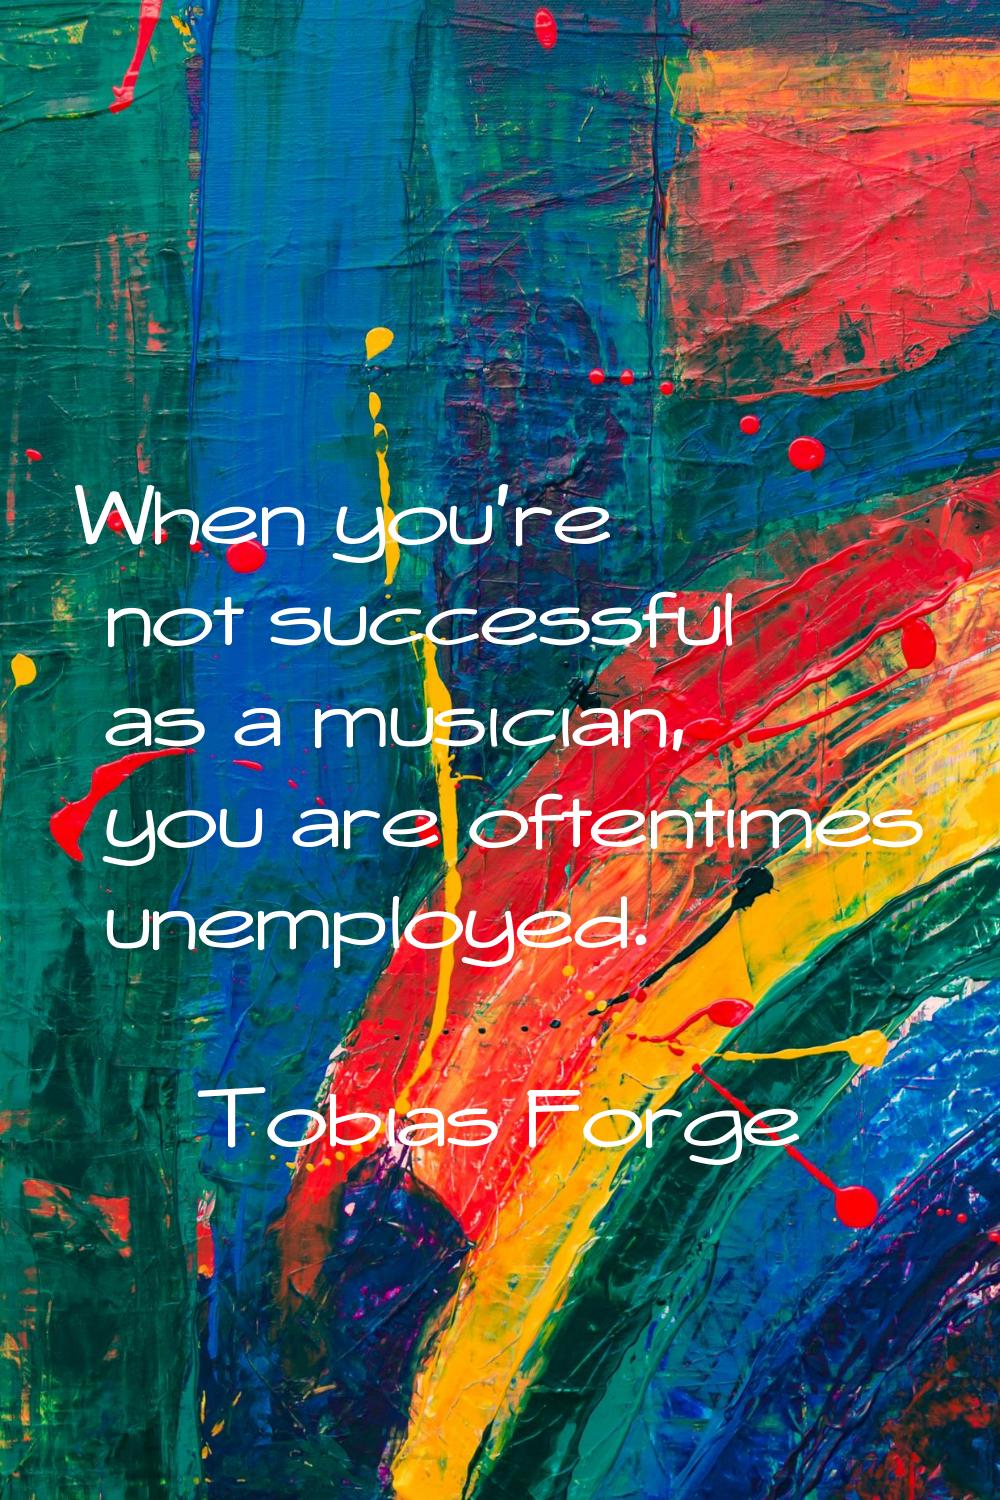 When you're not successful as a musician, you are oftentimes unemployed.